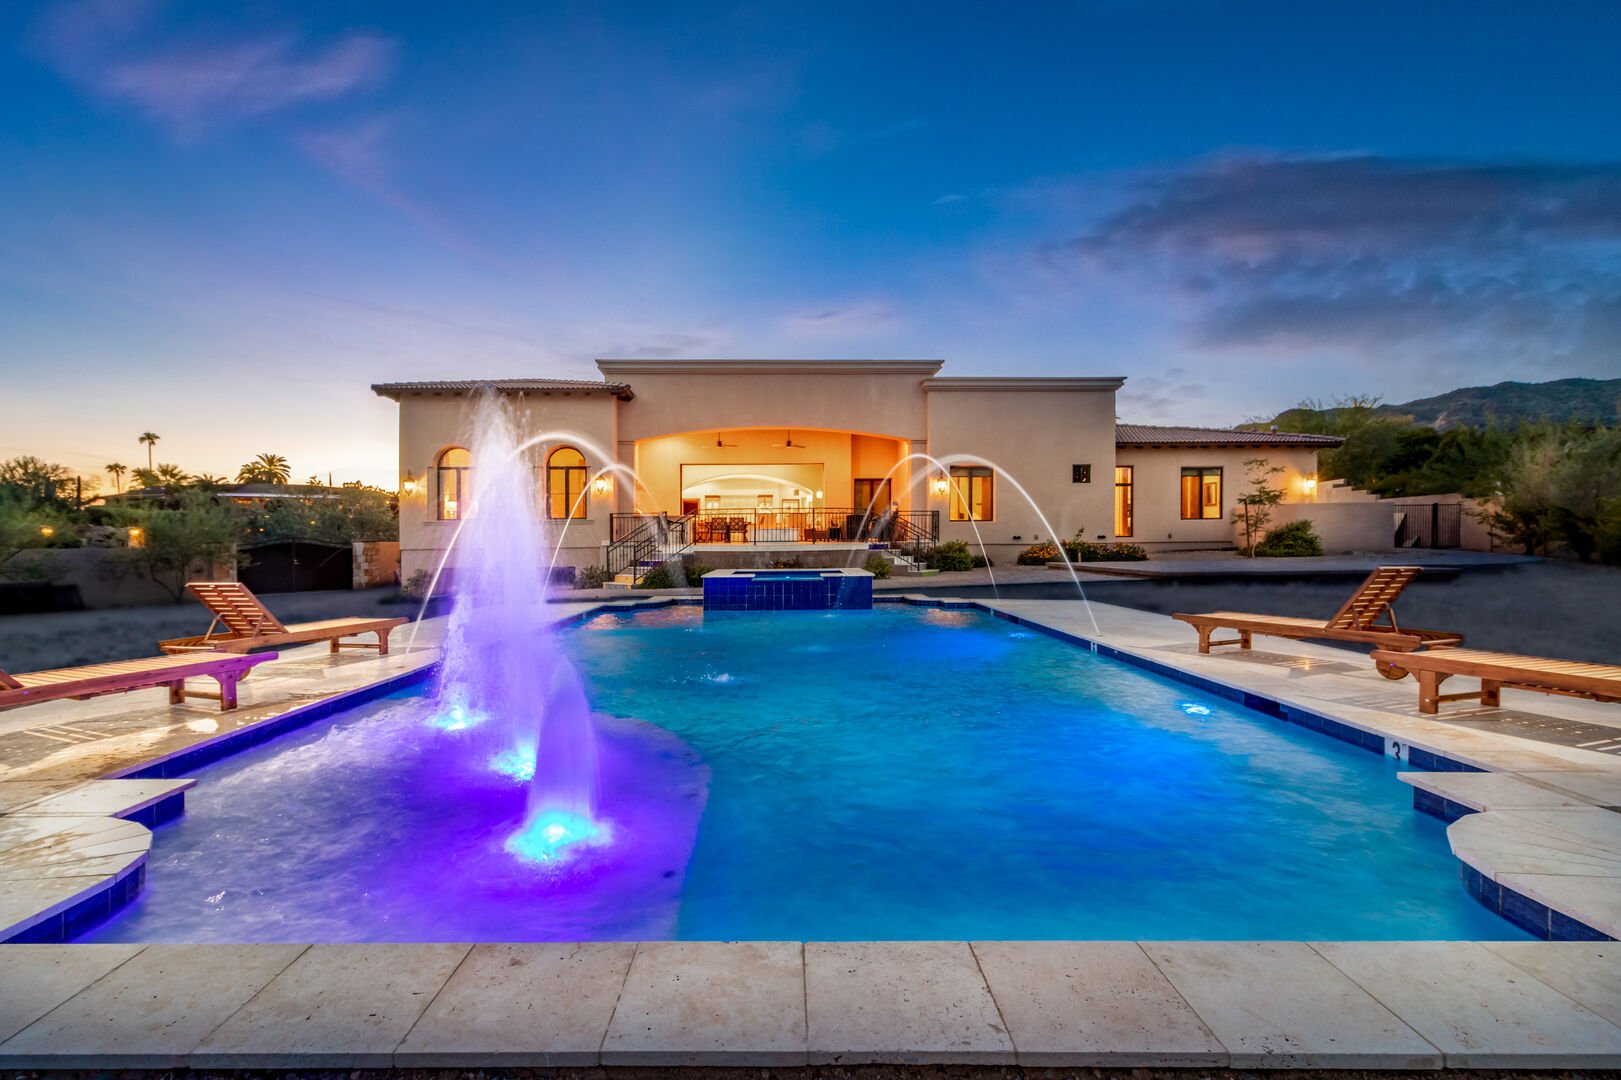 The luxury pool of this vacation home rental in Phoenix, with water features and pool chairs along the sides.